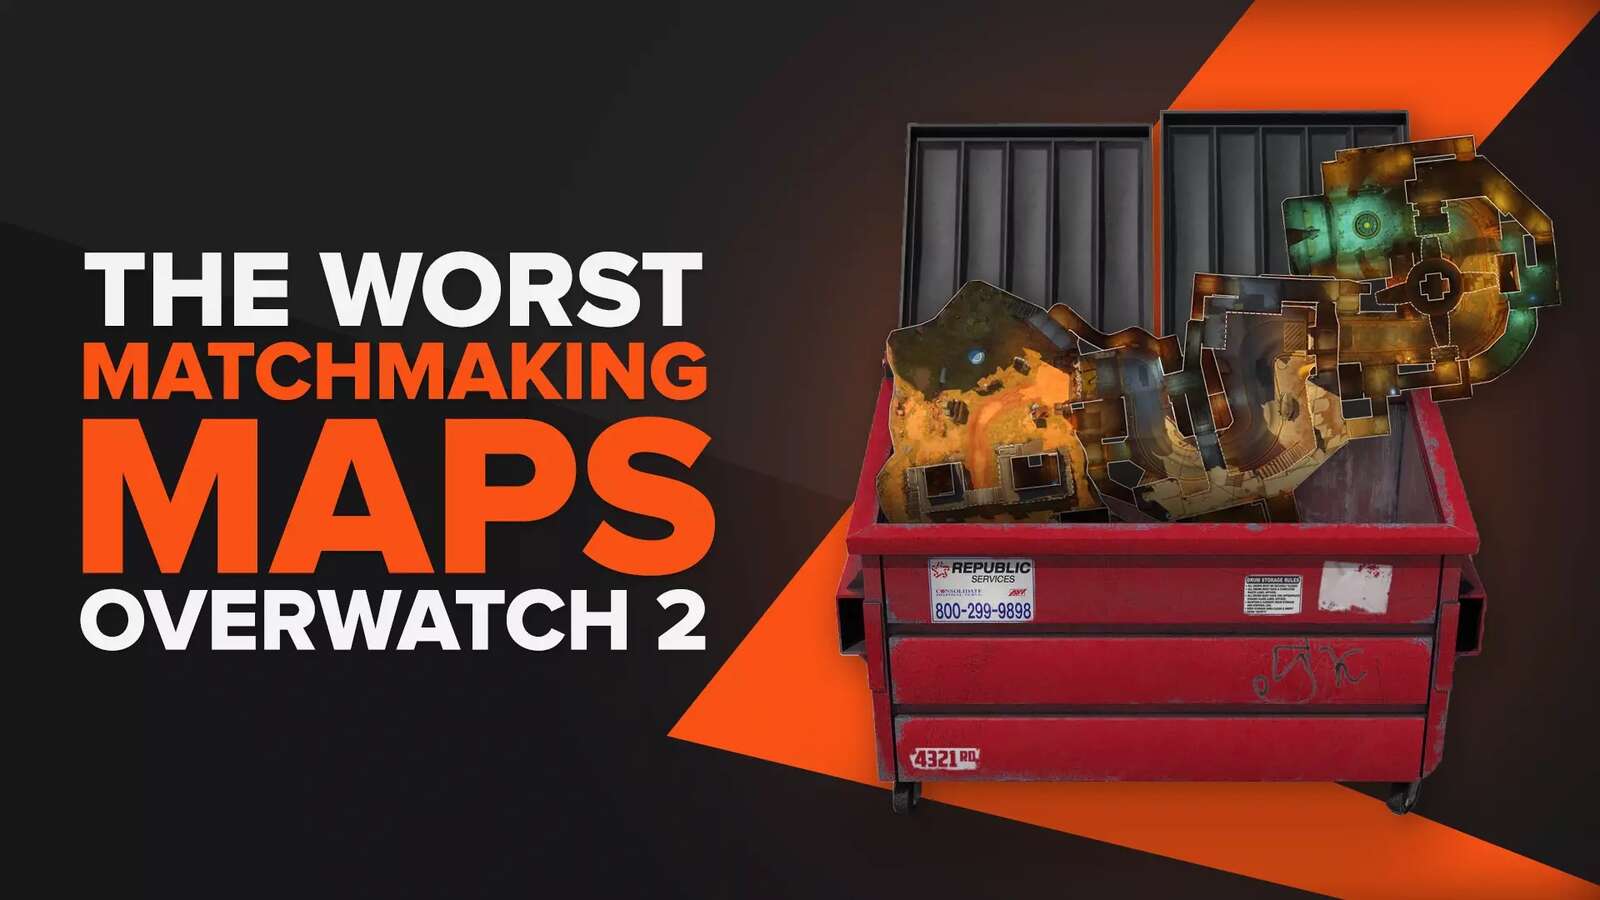 9 Worst Maps in Overwatch 2 Matchmaking [Ranked]